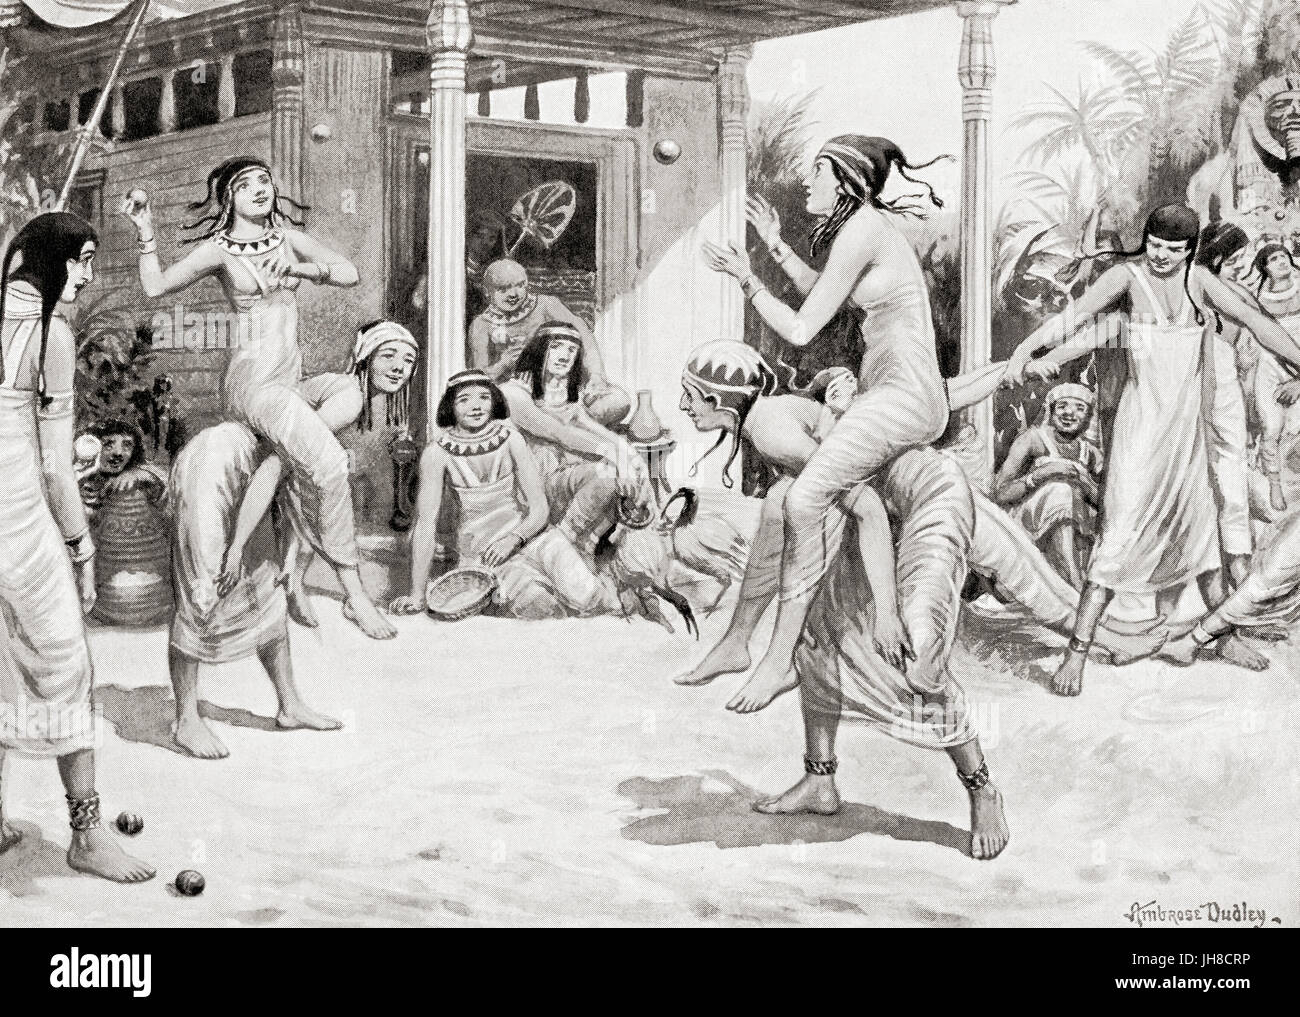 Young girls playing ball in the form of a dance in ancient Egypt.  After the painting by Ambrose Dudley (1867-1951).  From Hutchinson's History of the Nations, published 1915. Stock Photo